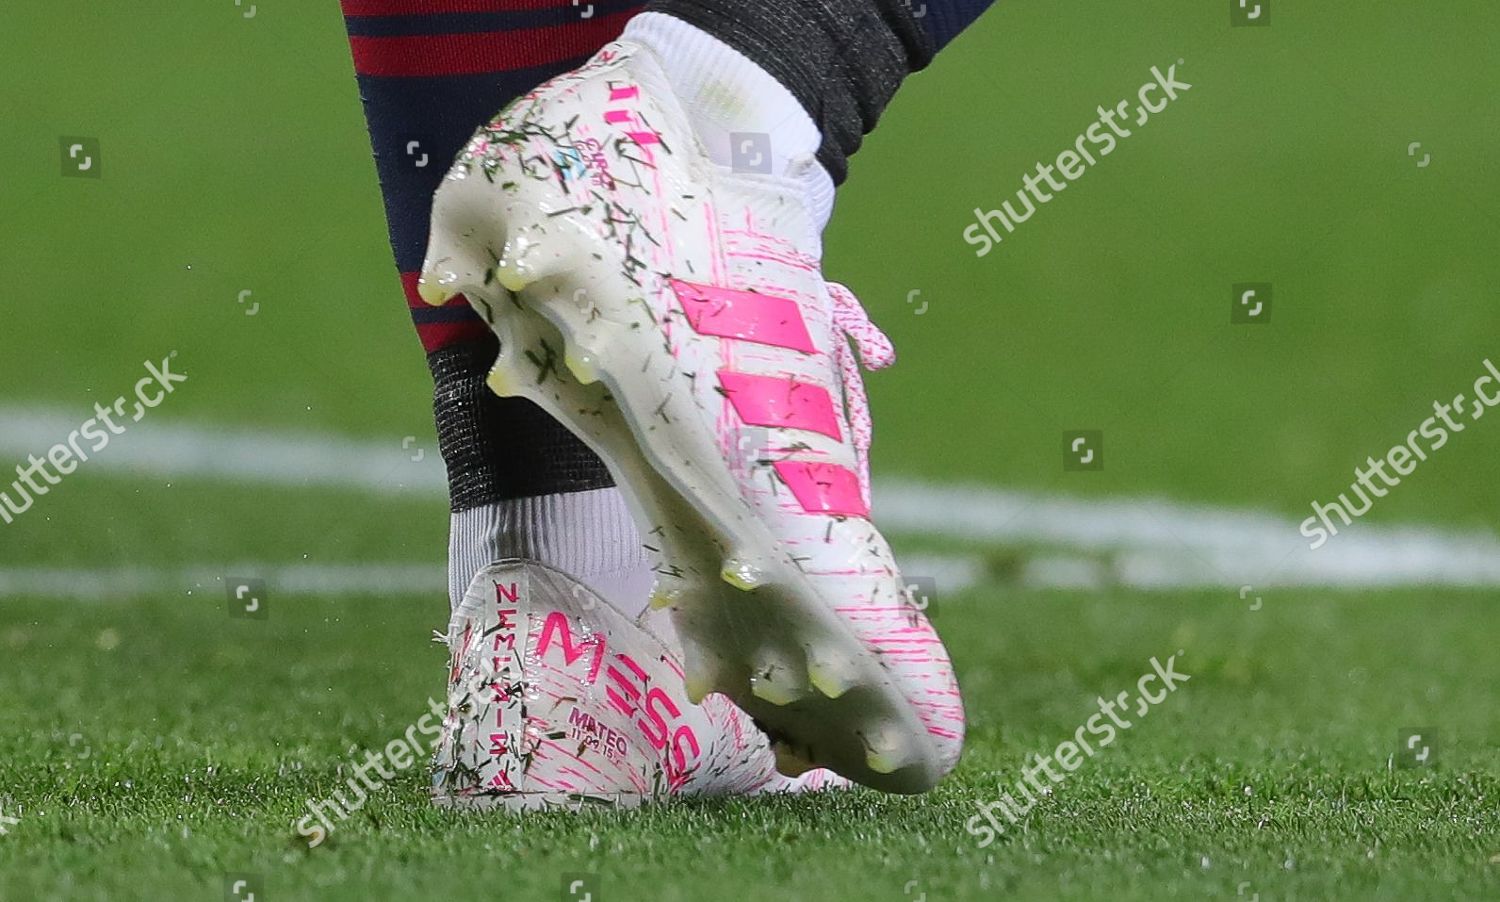 messi pink boots